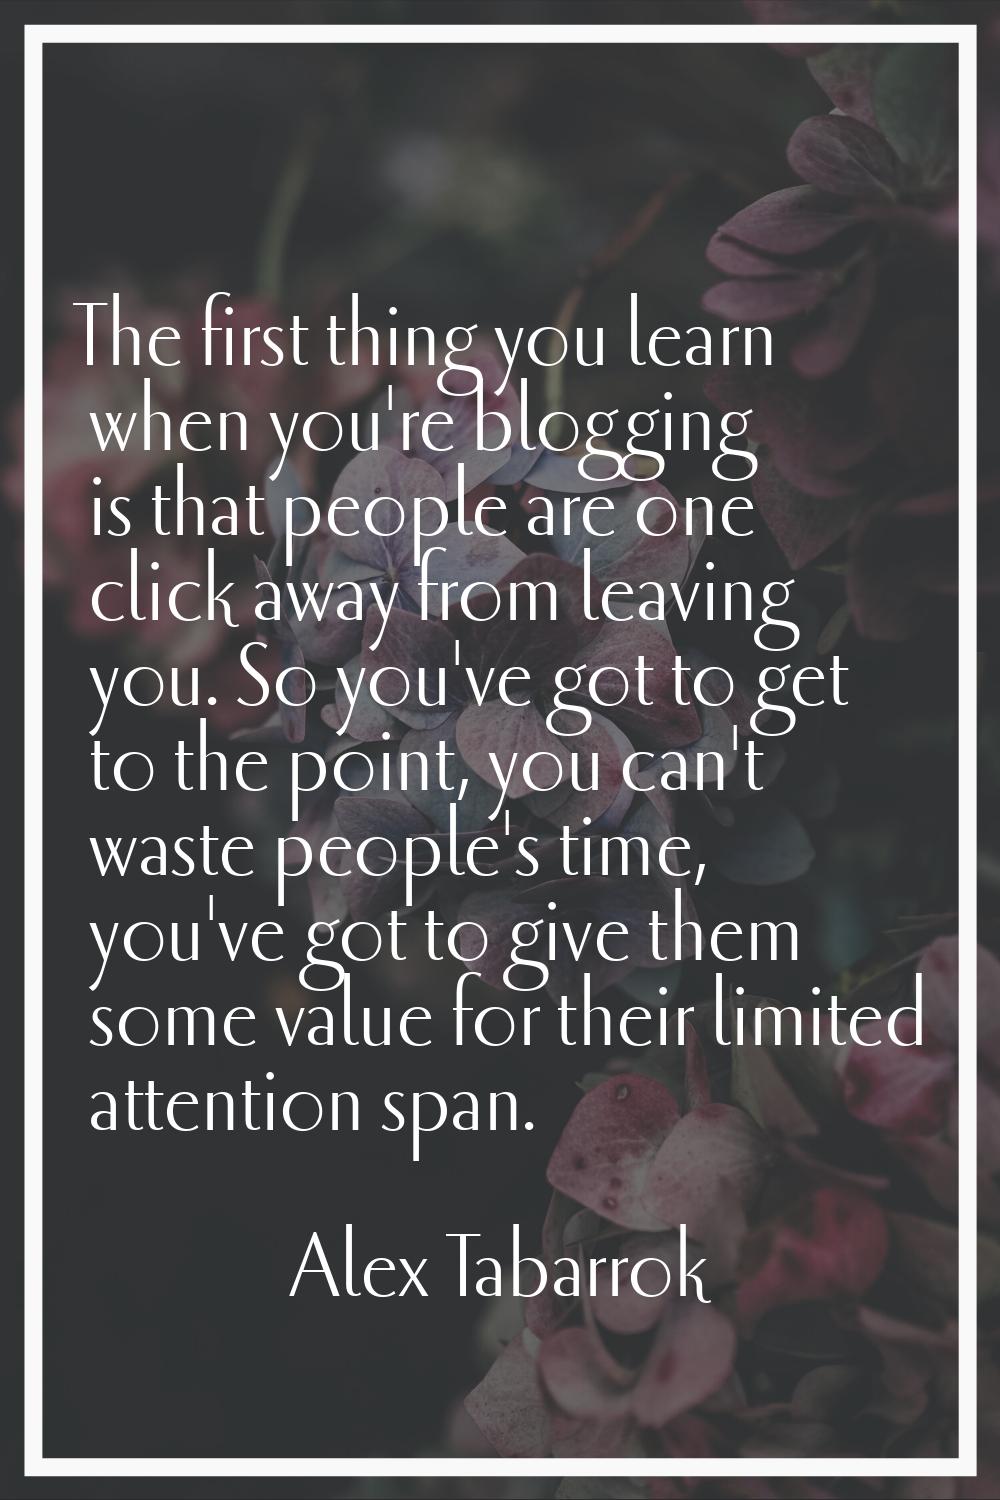 The first thing you learn when you're blogging is that people are one click away from leaving you. 